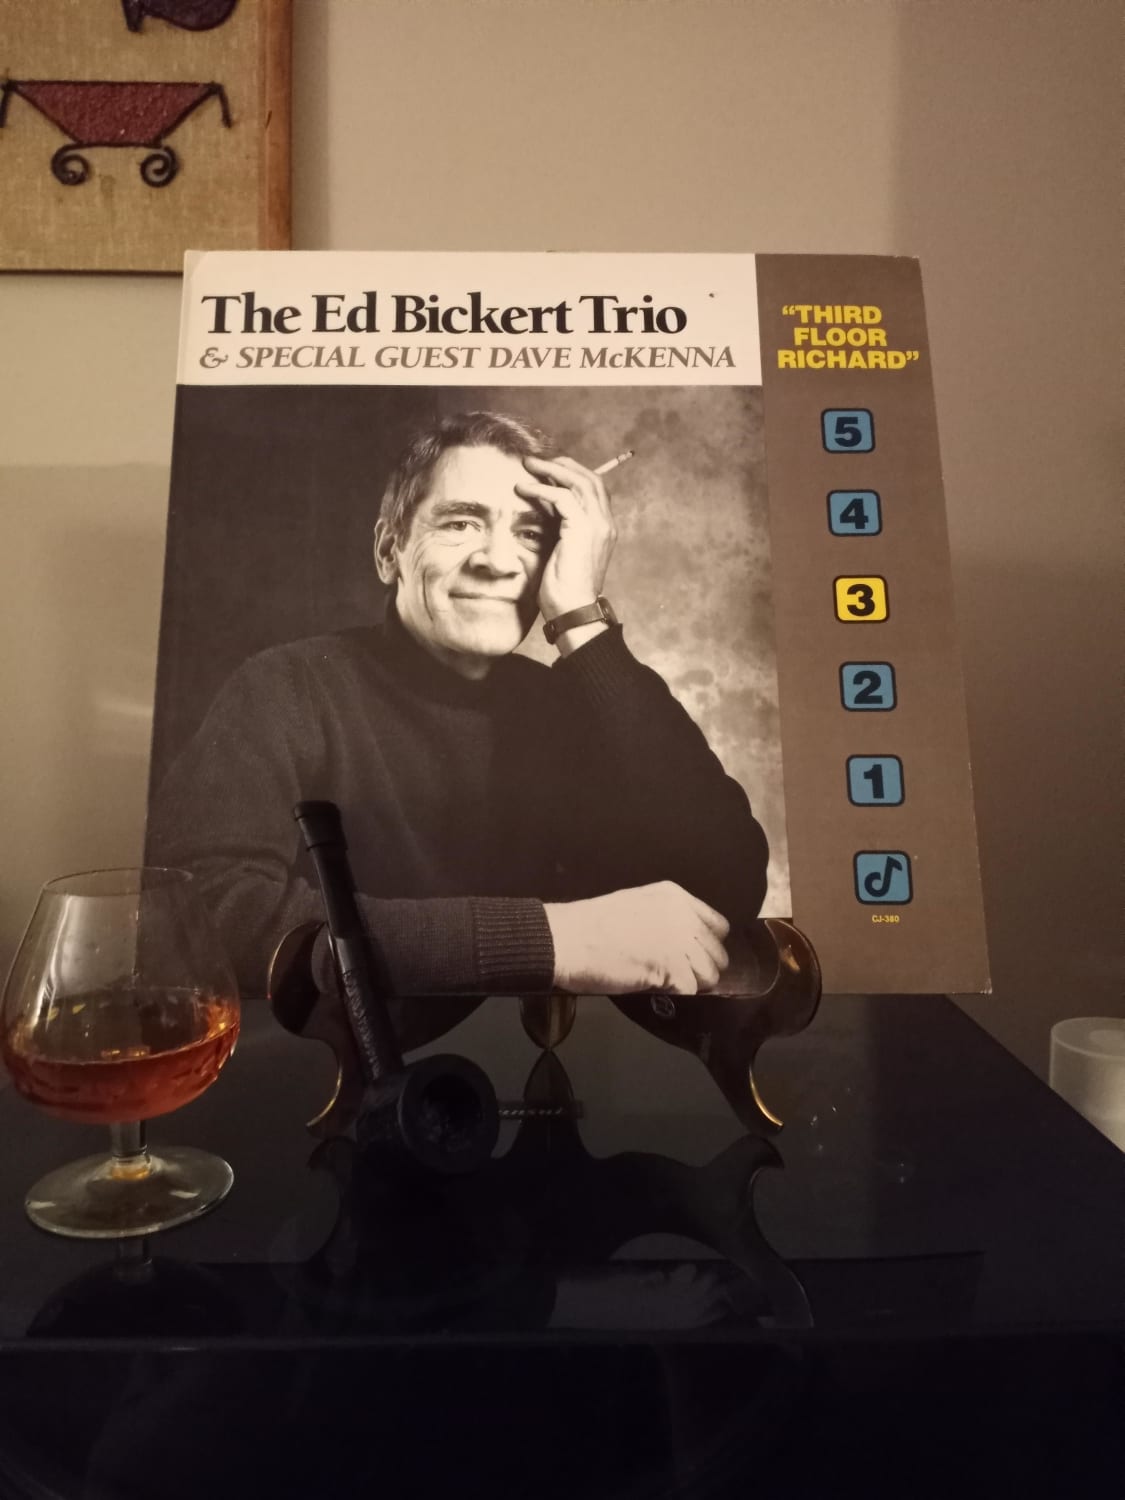 One of my favorite guitarists ever. Harmonizing is unmatchable. The unmistakably sound of that telecaster with those harmonies and that feather lite touch. Any other Bickert fans in here ? A real treasure of the genre, and life changing for me to say the least.